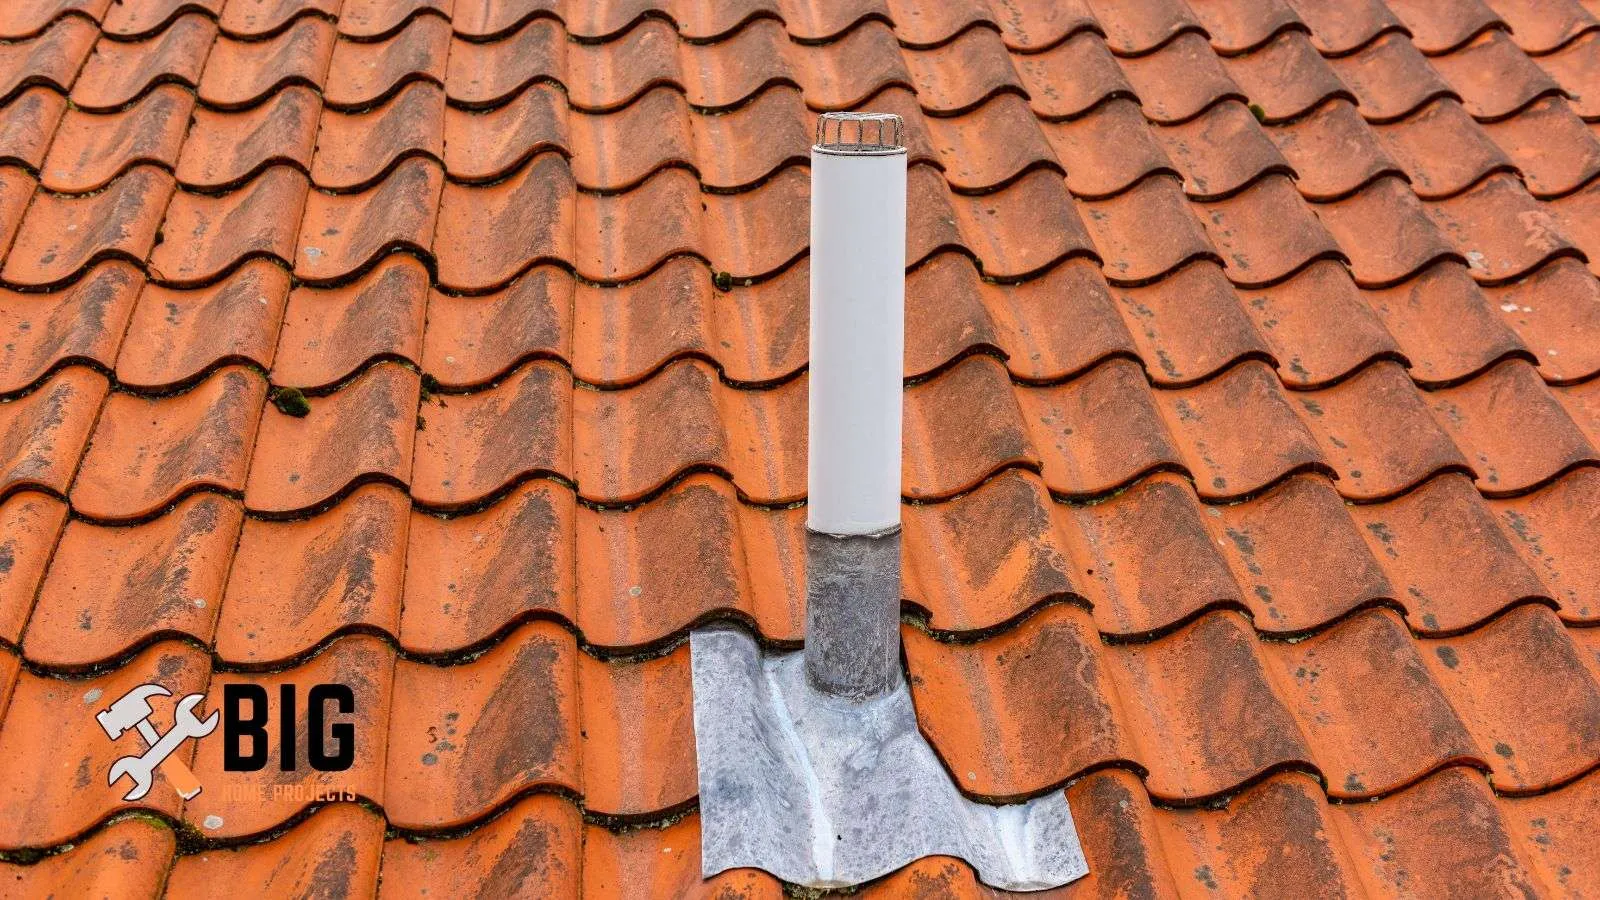 Plumbing vent on a roof - bighomeprojects.com